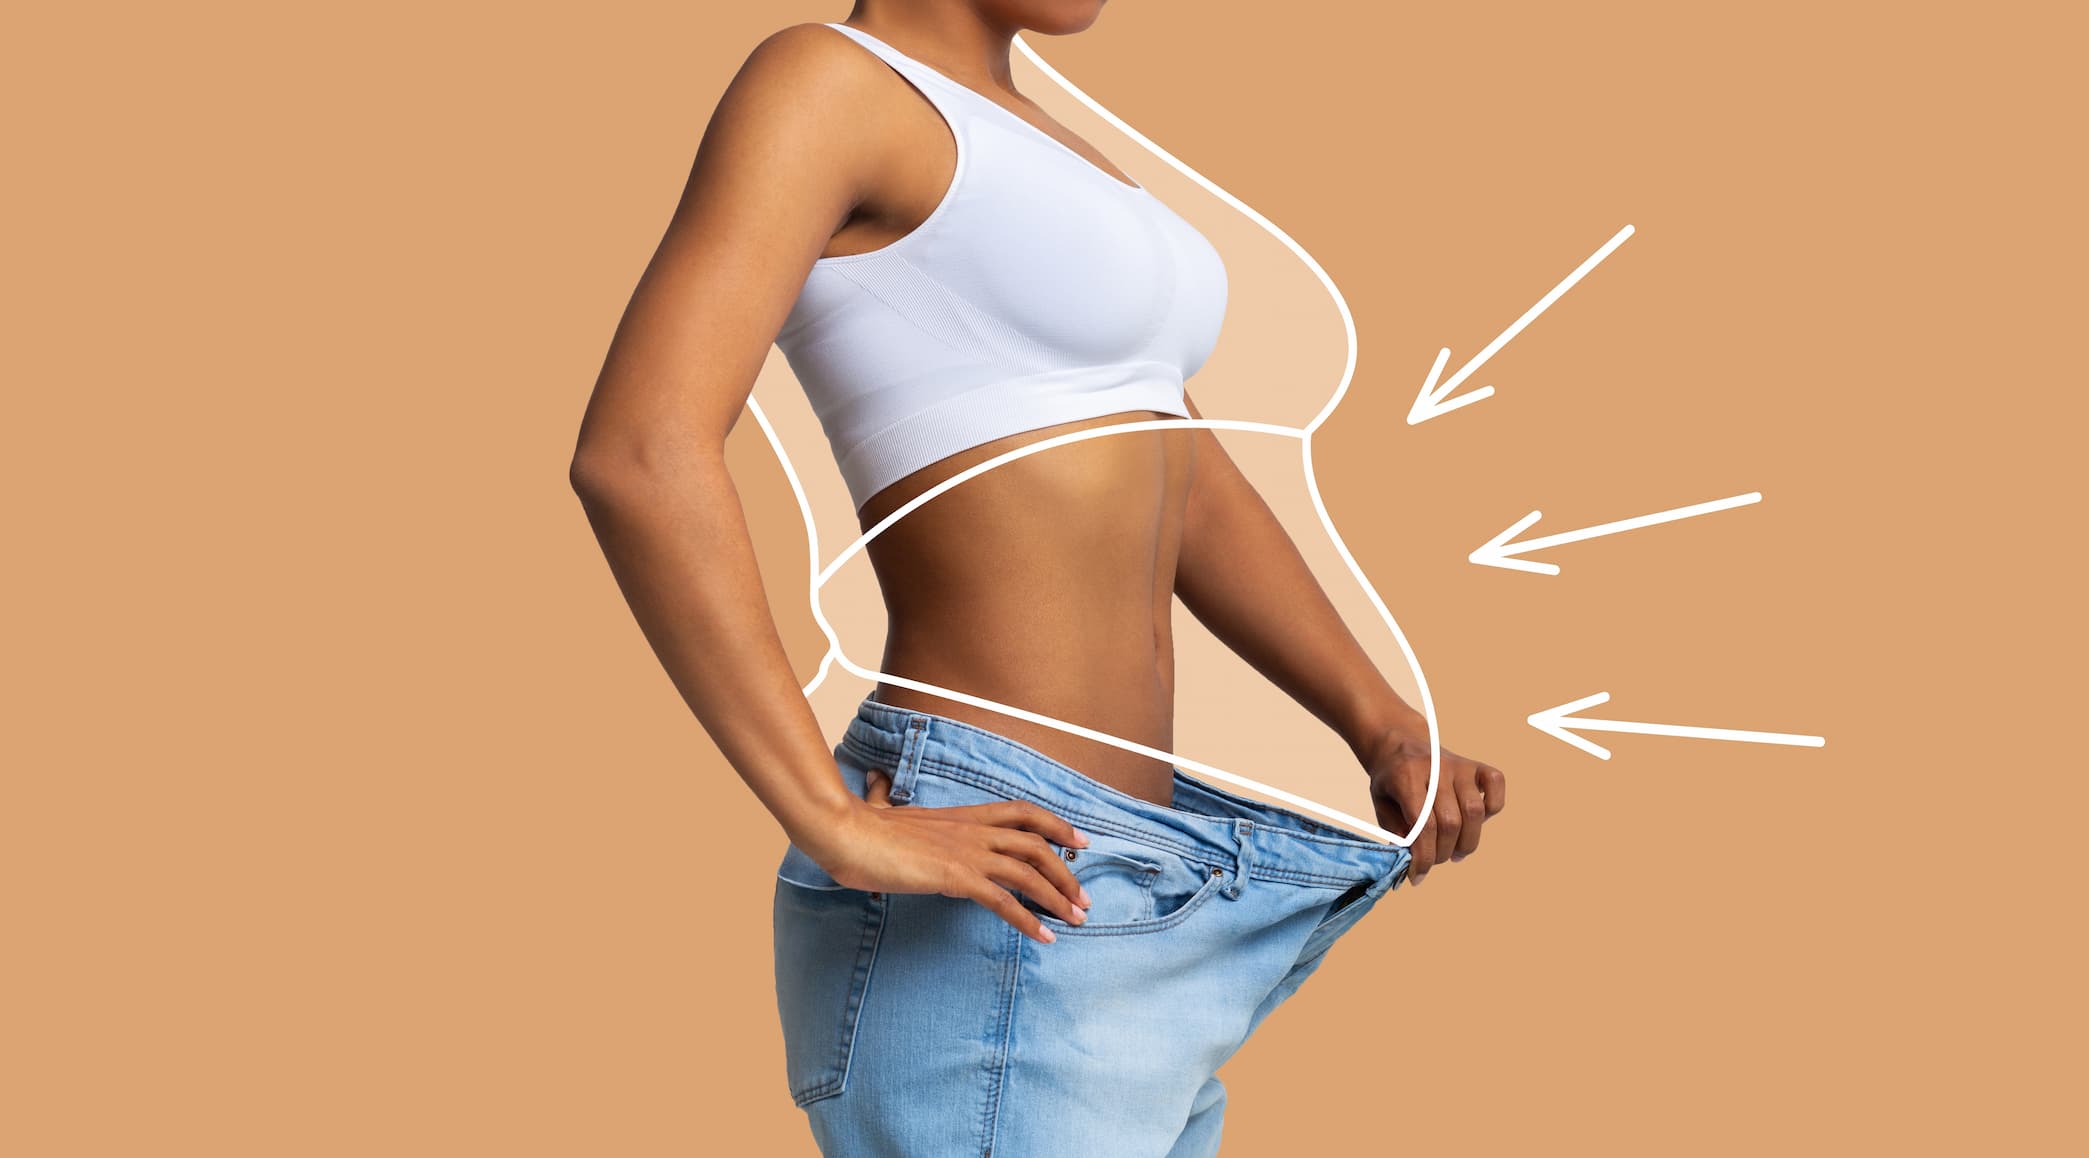 what is the safest weight loss surgery